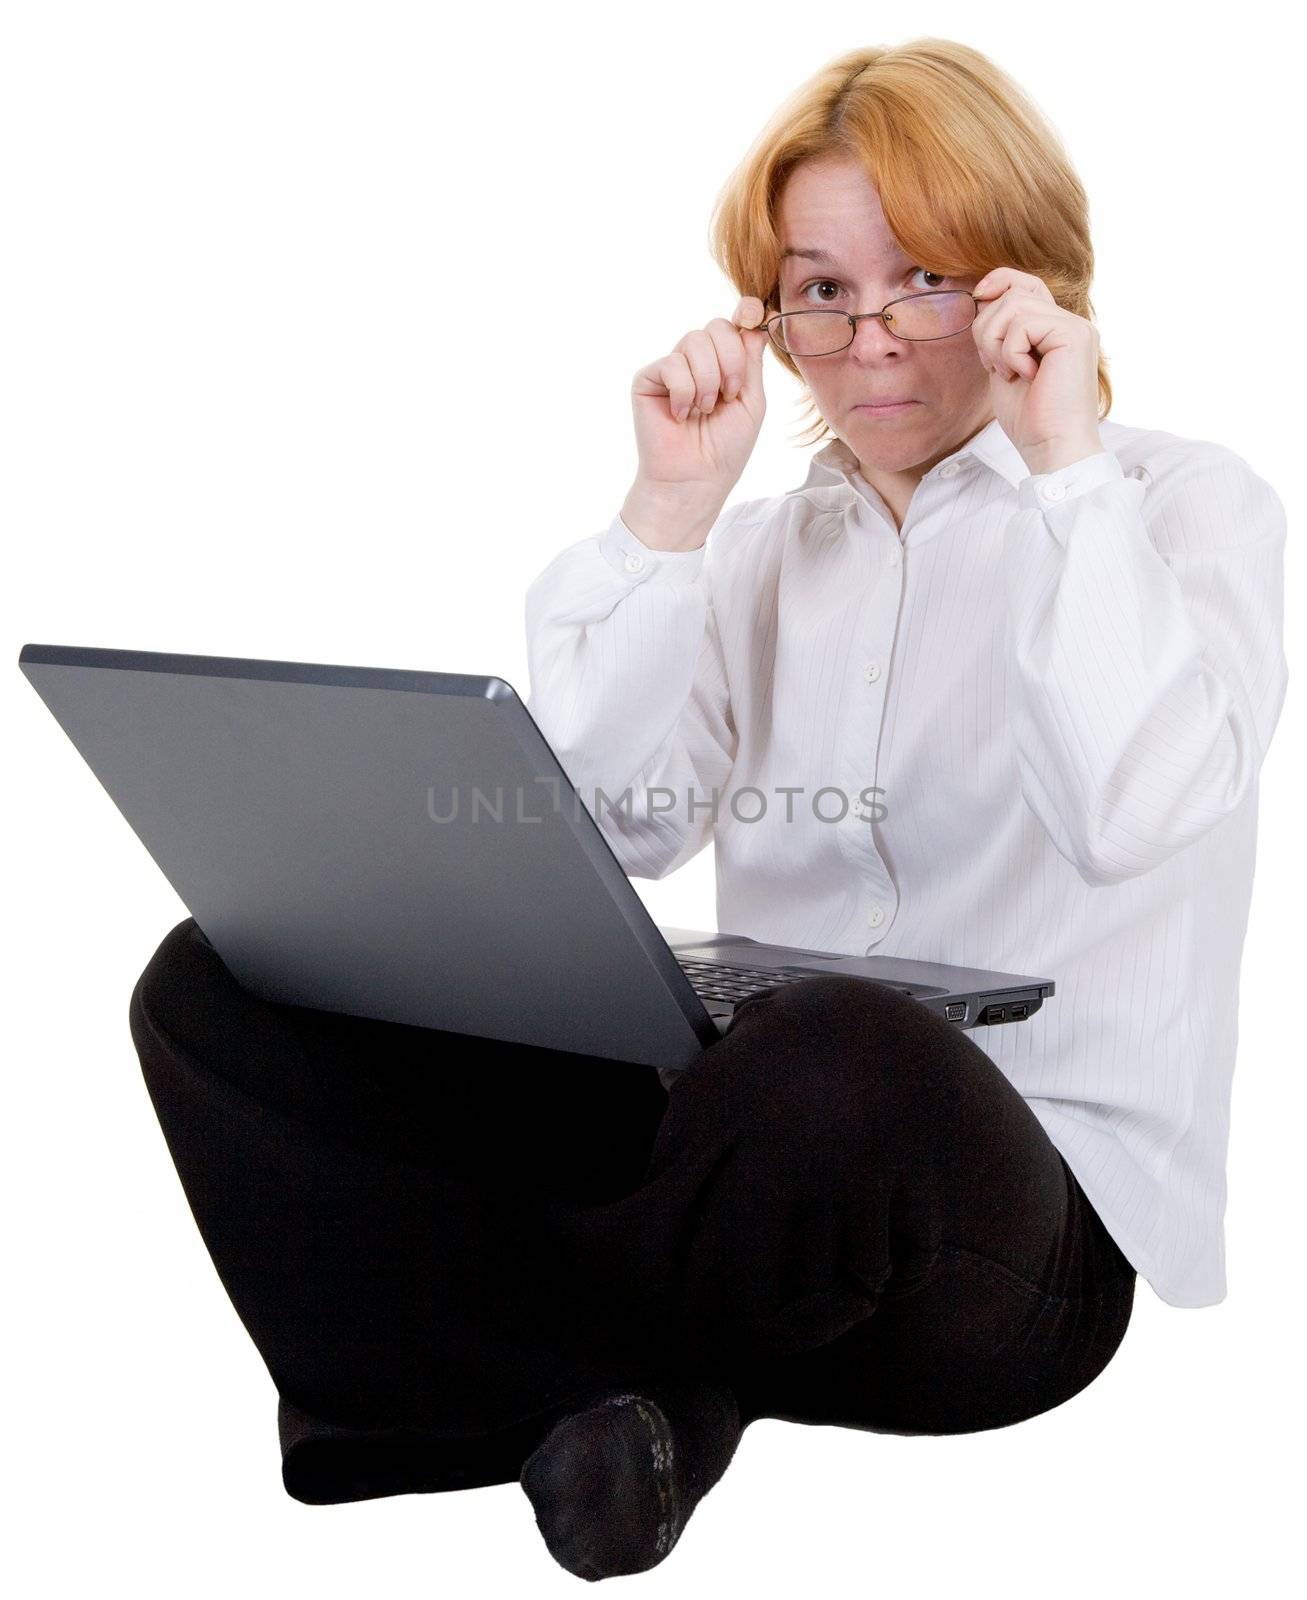 The woman sitting on a floor with the laptop